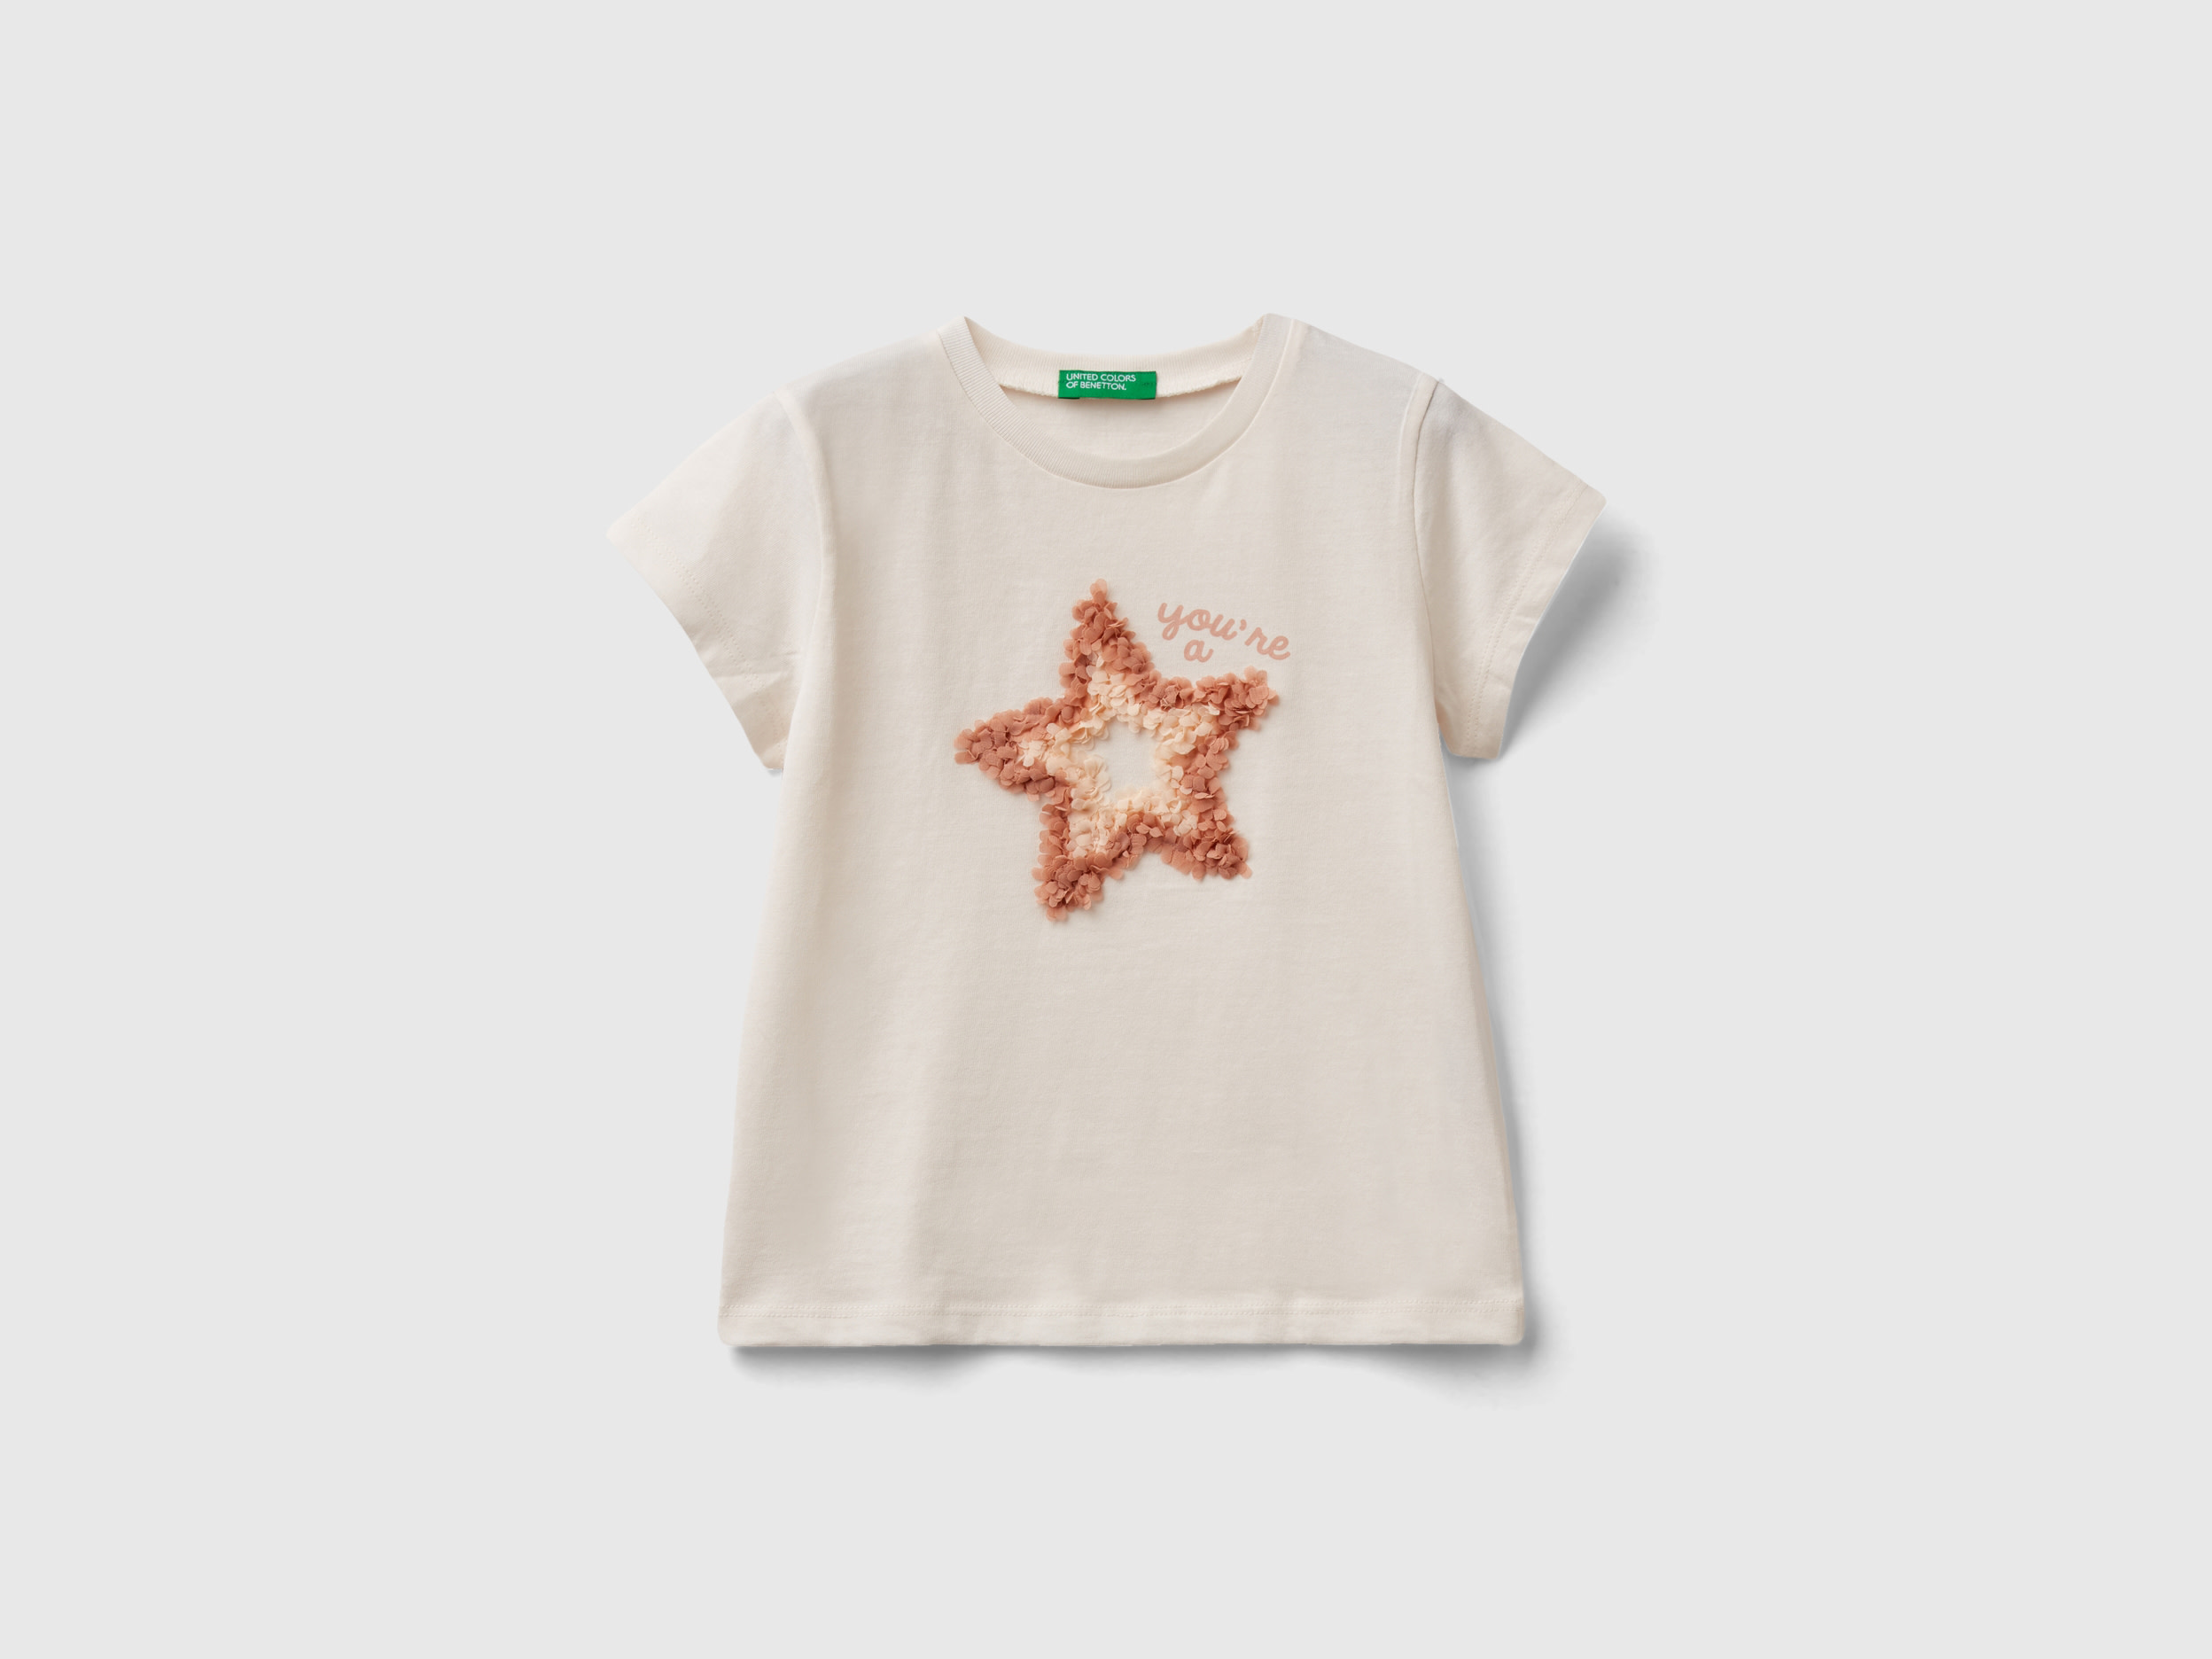 Image of Benetton, T-shirt With Petal Effect Applique, size 82, Creamy White, Kids